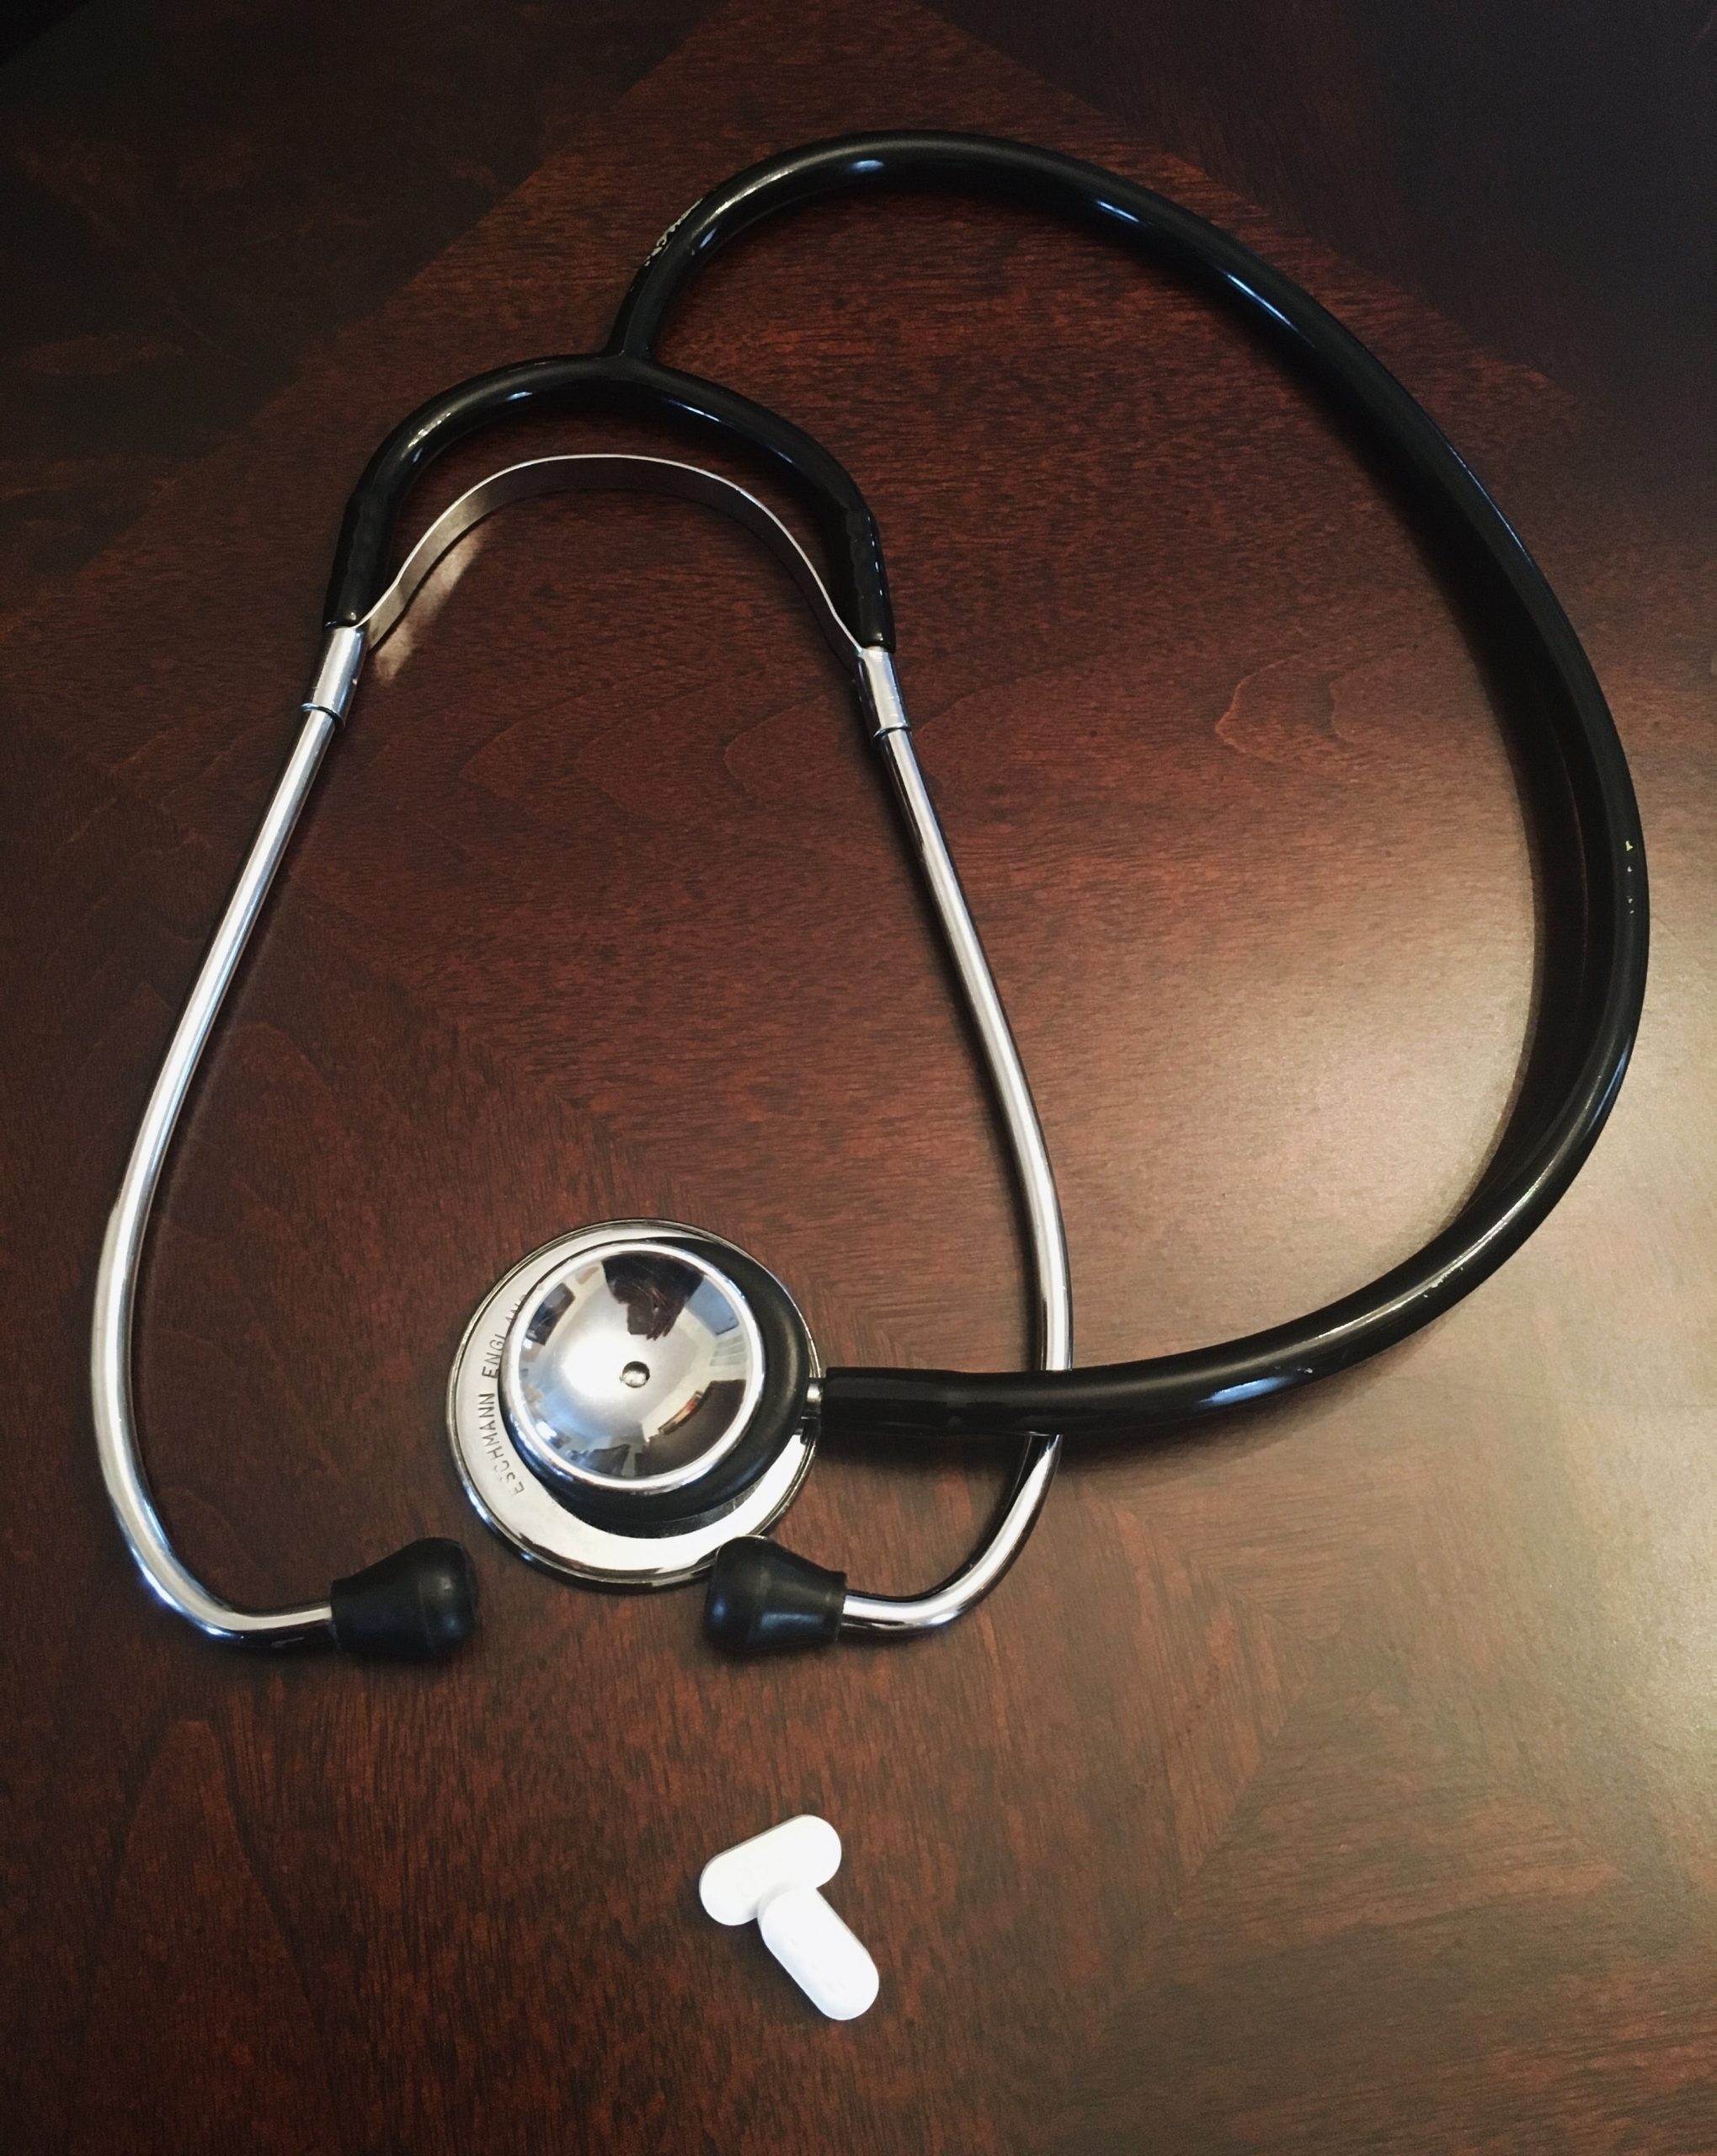 stethoscope and tablets